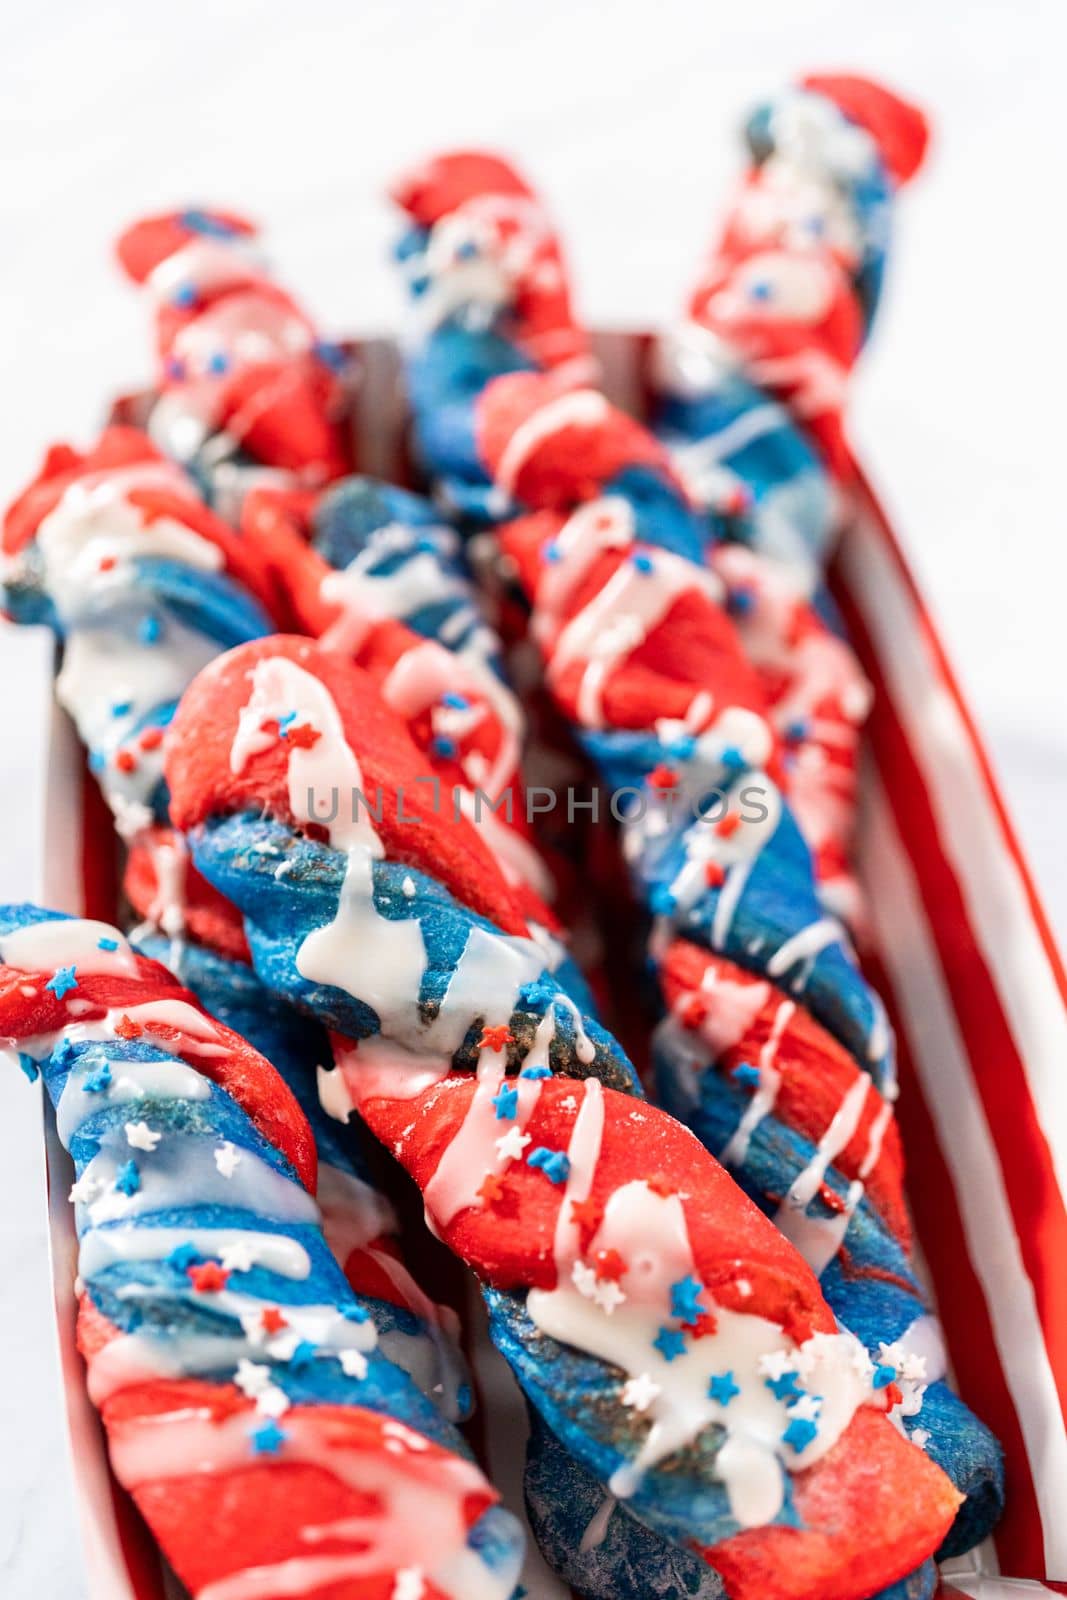 Patriotic cinnamon twists drizzled with a white glaze and decorated with star sprinkles.